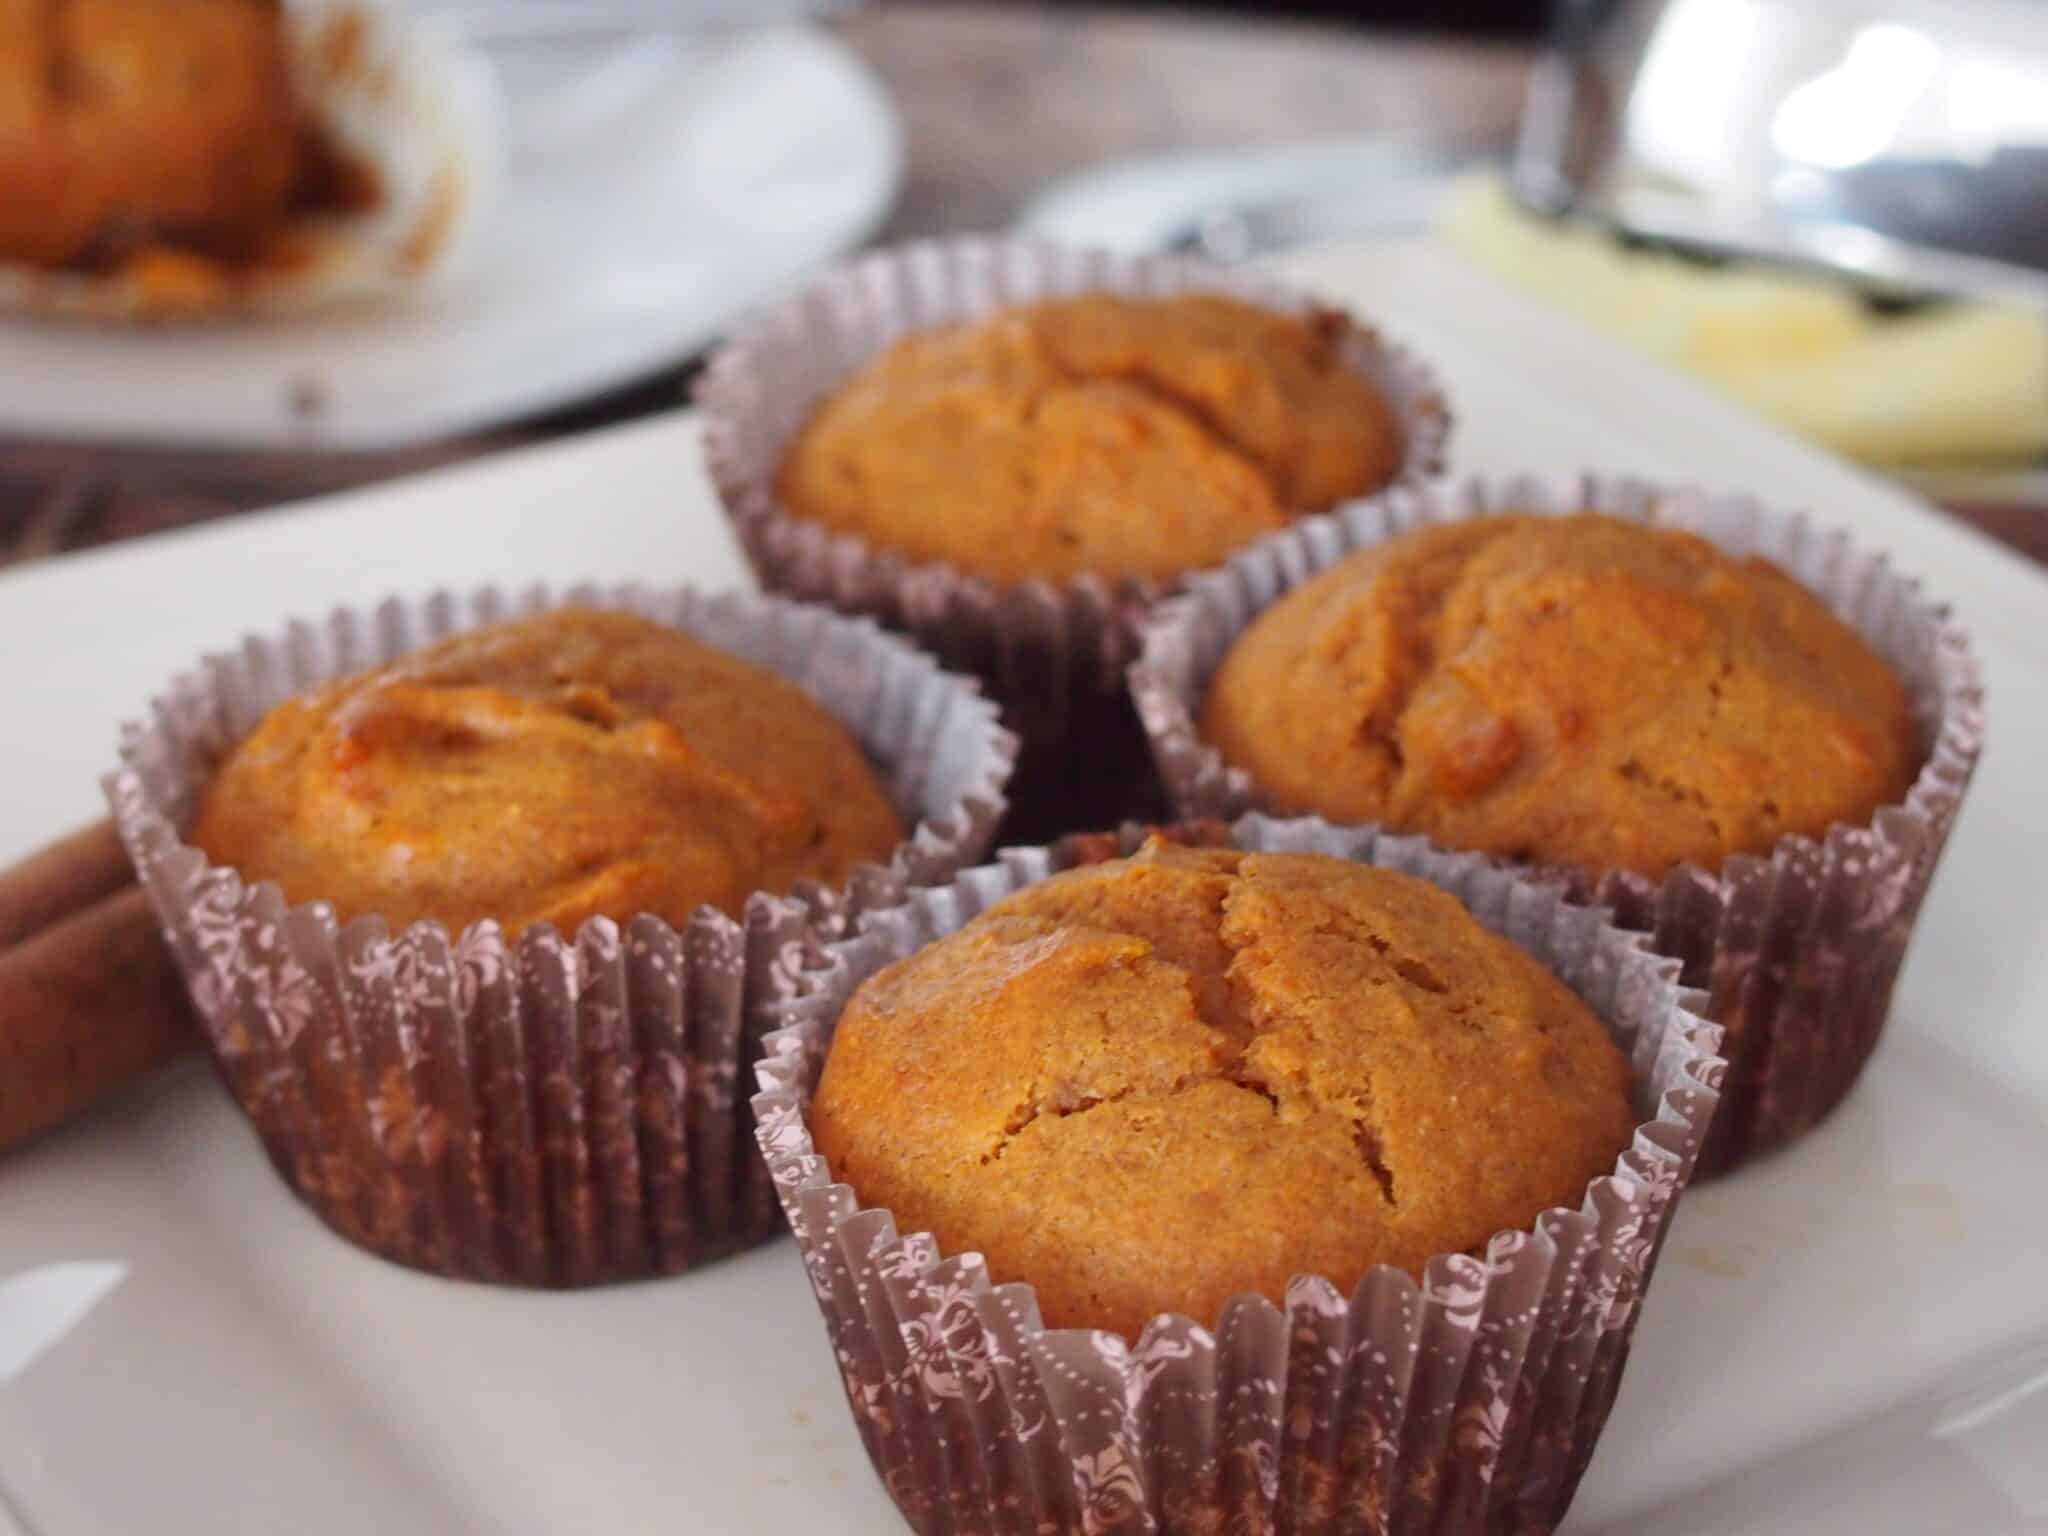 Four Carrot muffins on white dish.